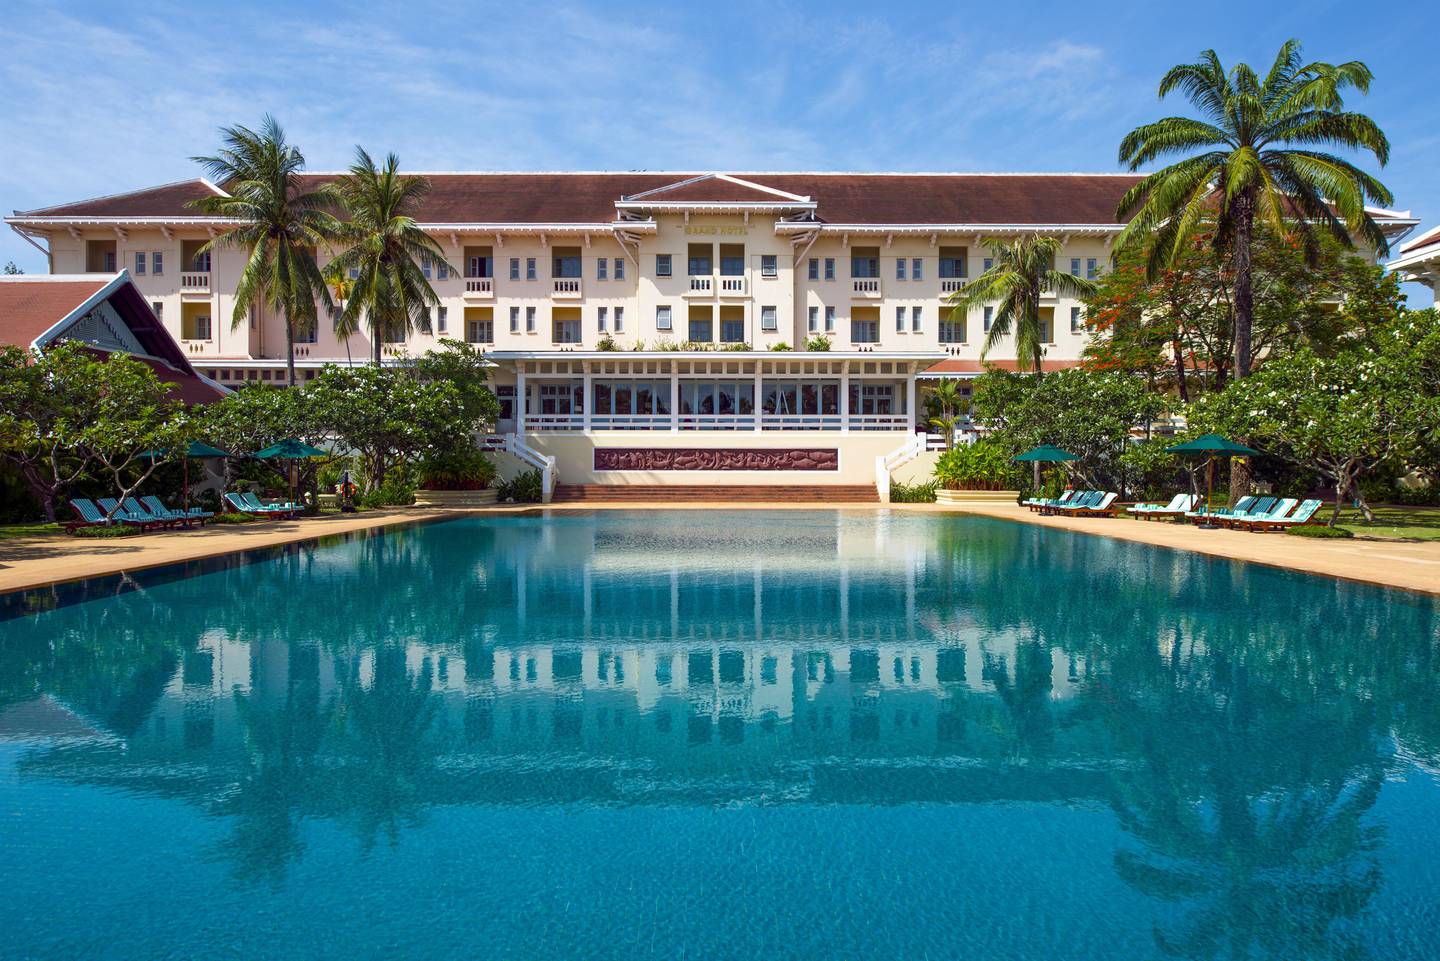 The Grand Hotel D'Angkor in Siem Reap opened in 1932 and is one of the landmark historic hotels of the legendary Grand Tour of Indochina. Raffles Grand Hotel d'Angkor